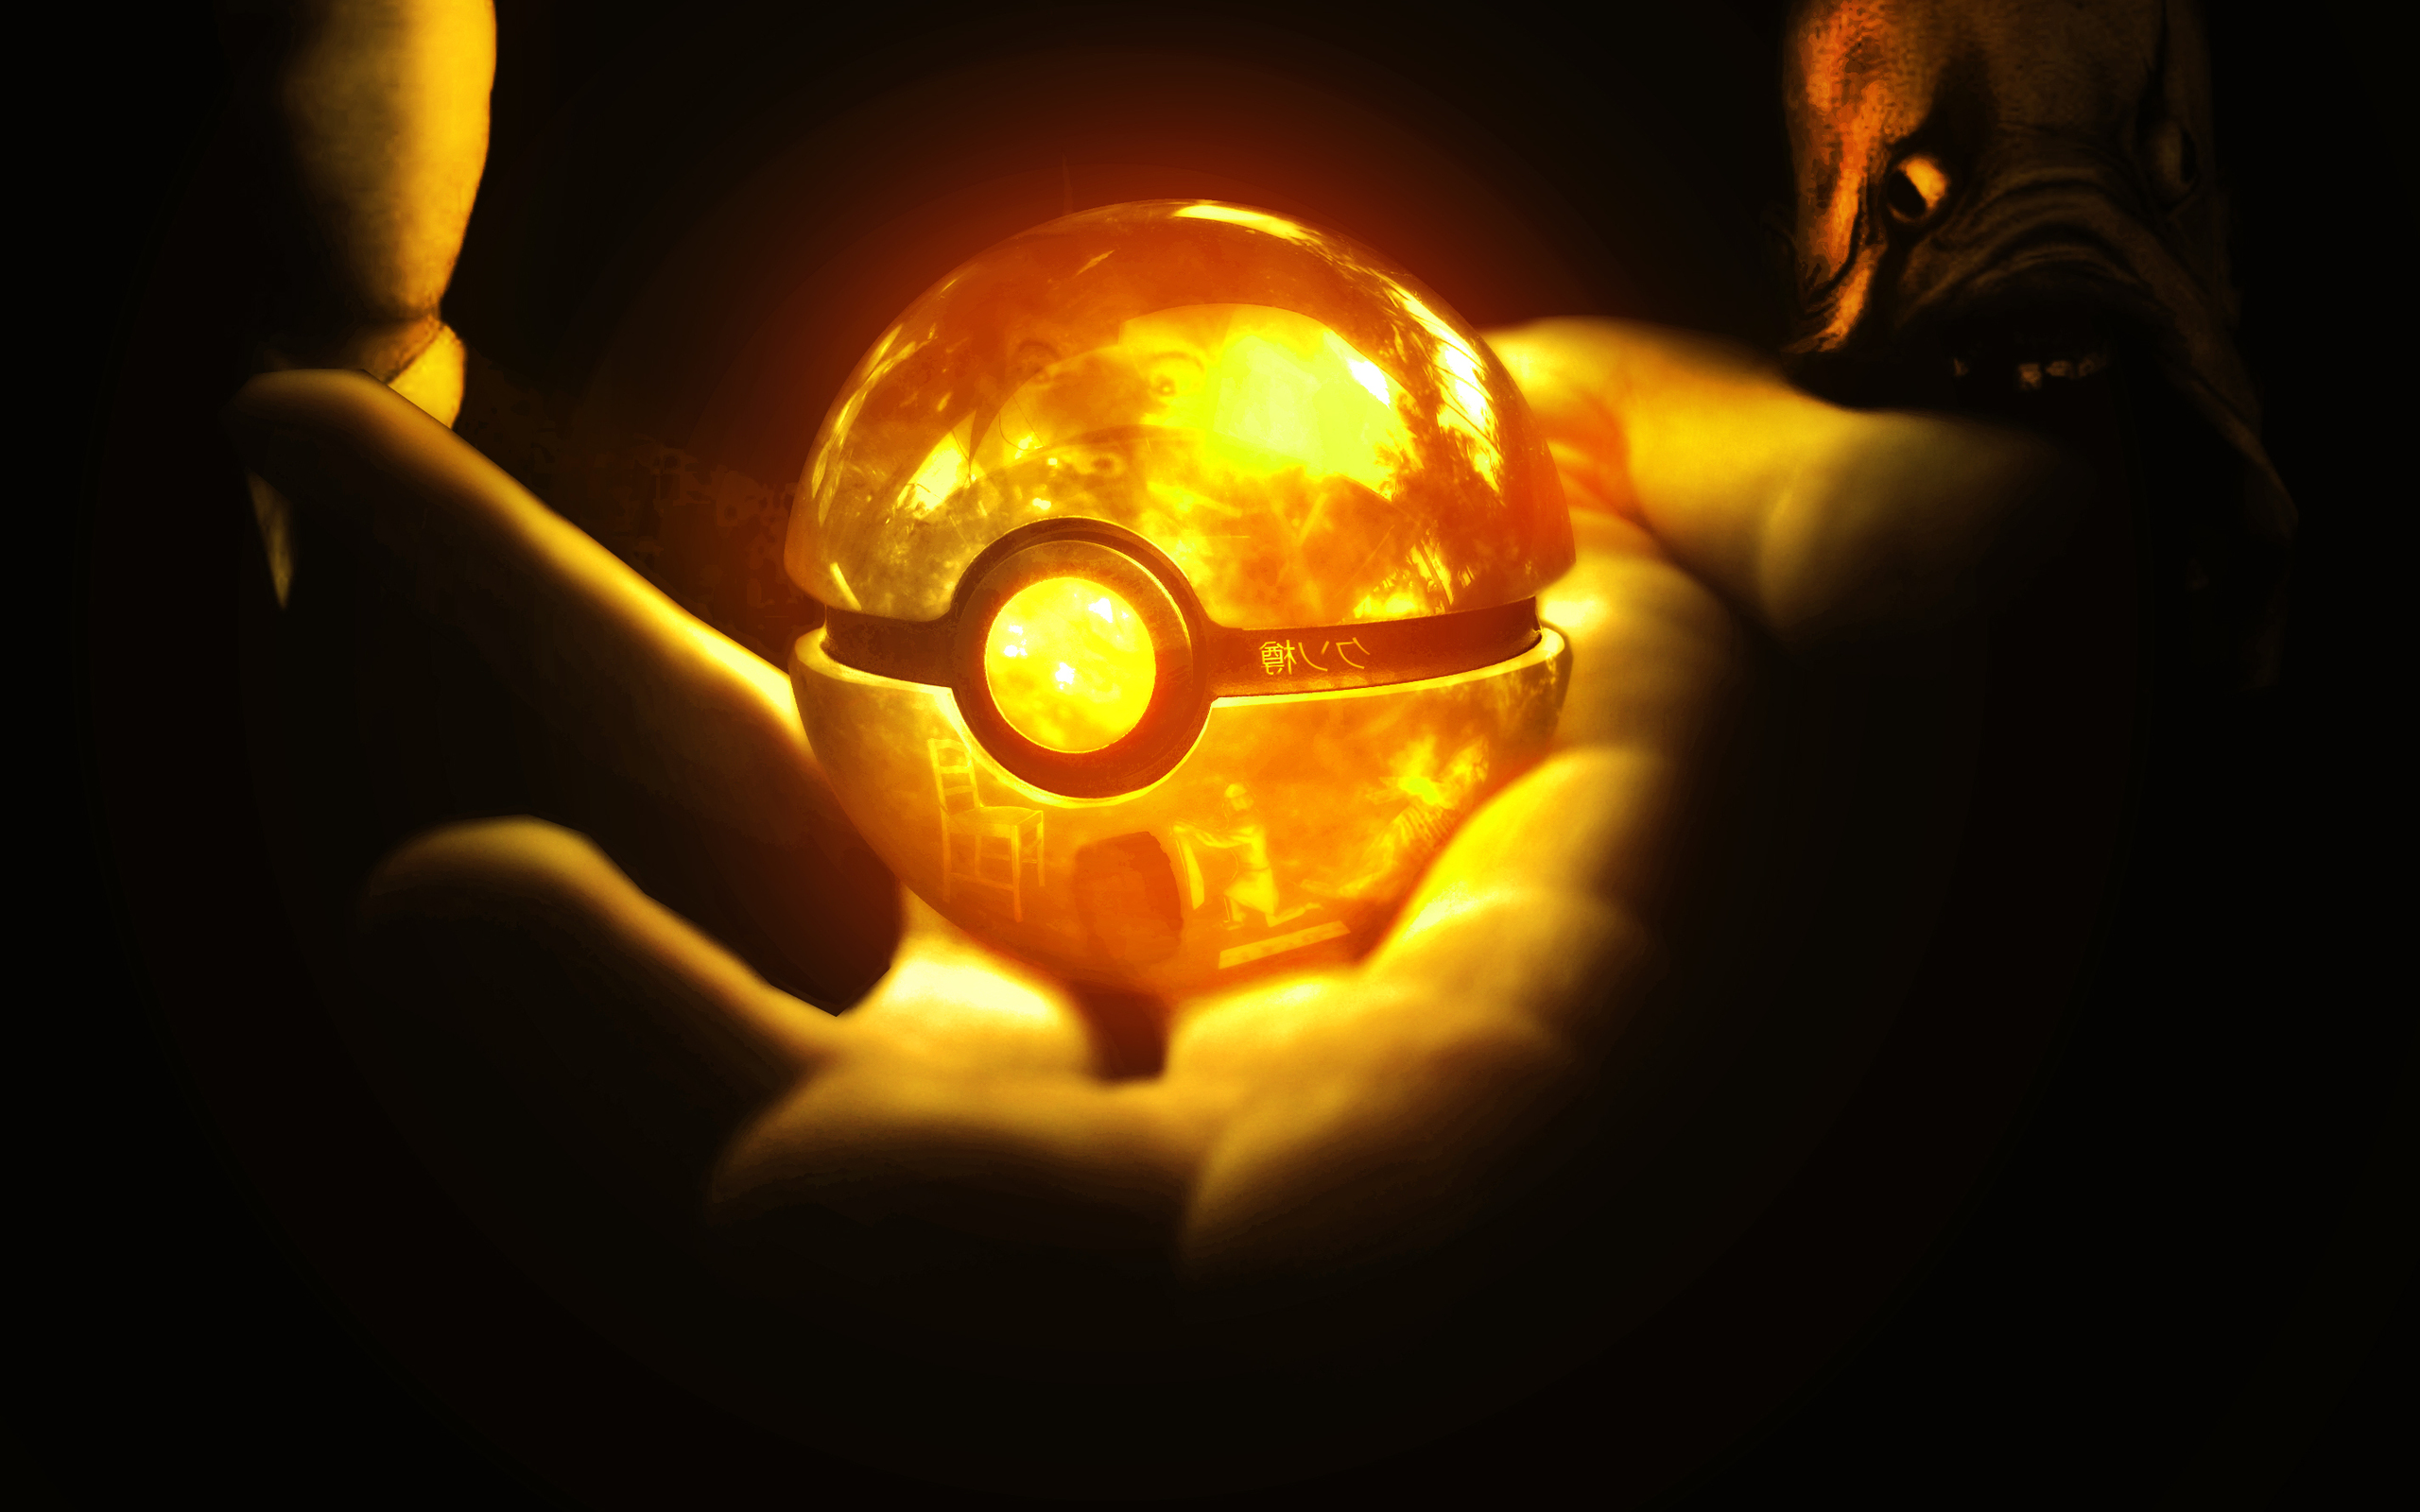 Pokemon Go Wallpaper Pictures And Image In Full HD